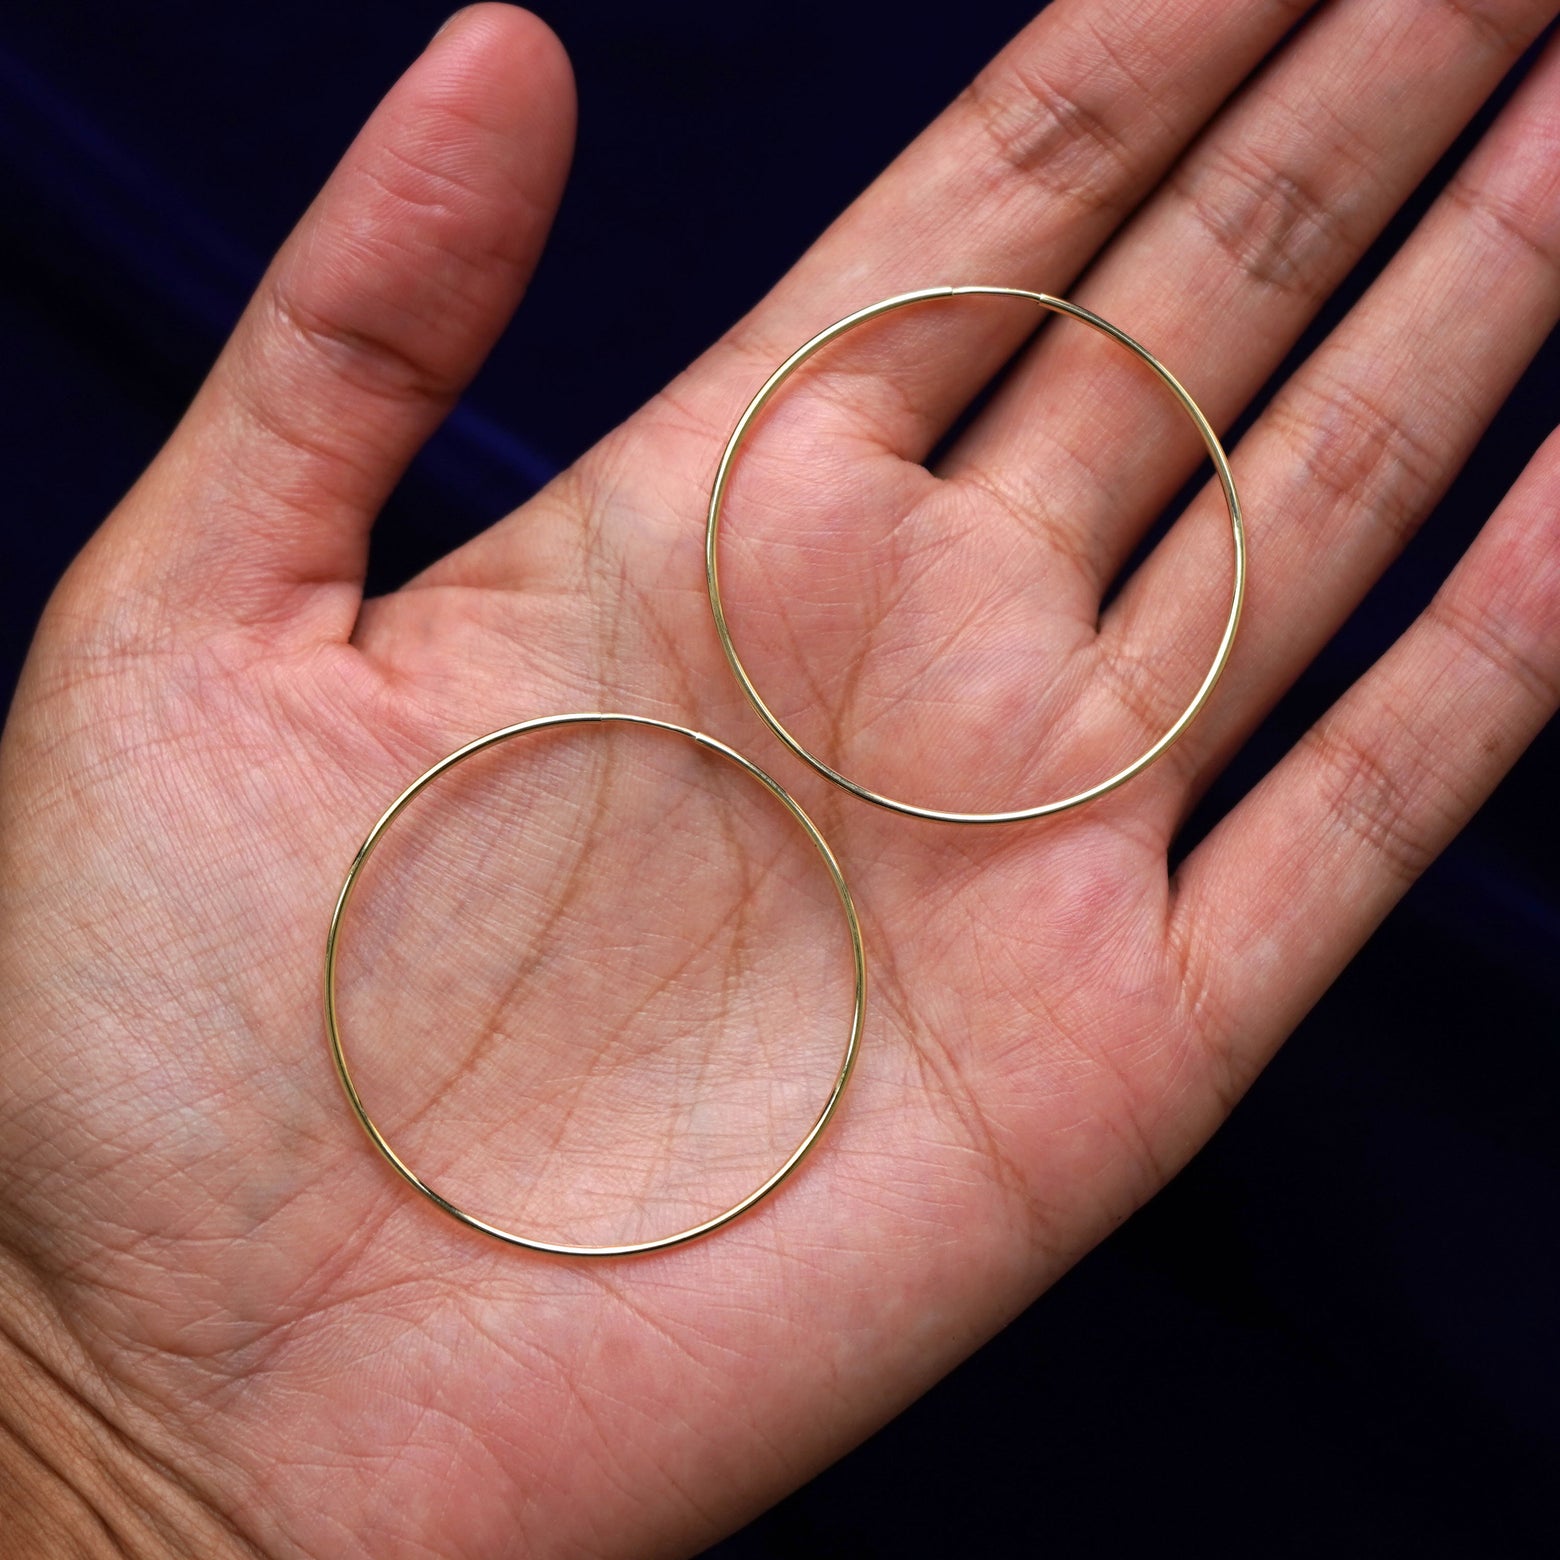 A pair of 14k gold Small Endless Hoop Earring sitting in a model's palm